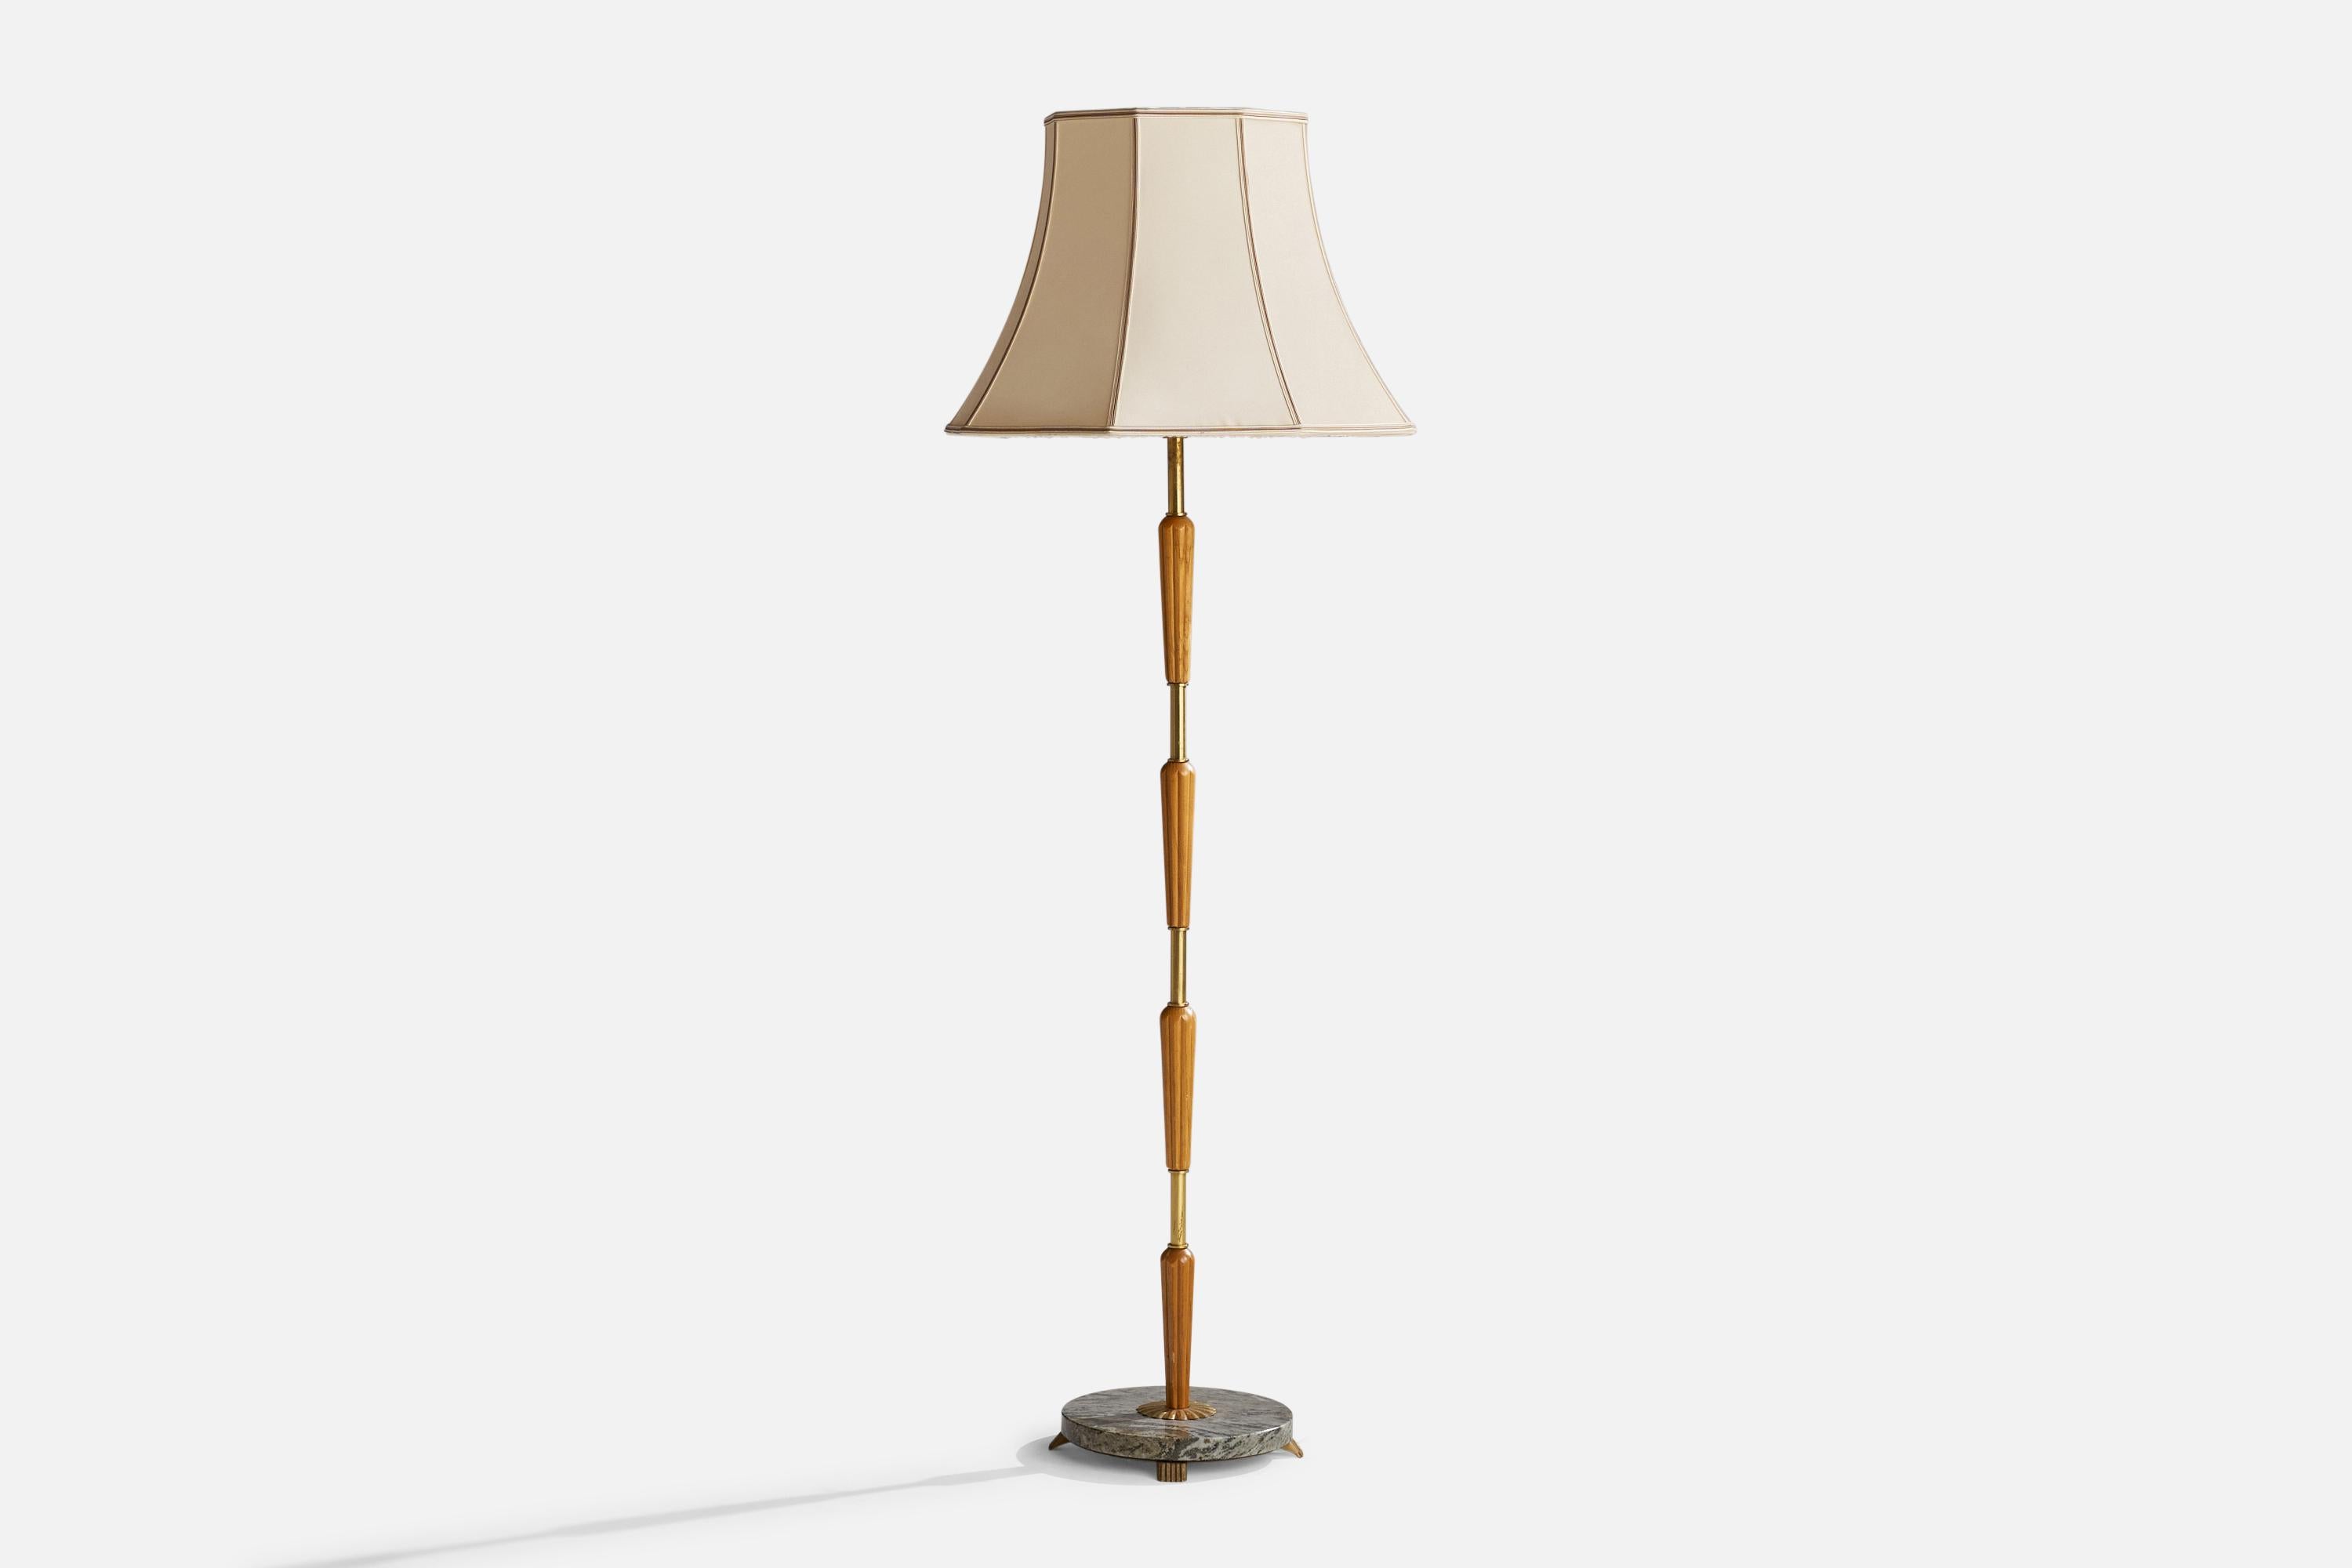 An off-white fabric, brass, oak and swedish green marble floor lamp designed and produced in Sweden, 1940s.

Overall Dimensions (inches): 62”  H x 21” W x 22” D
Stated dimensions include shade.
Bulb Specifications: E-26 Bulb
Number of Sockets: 1
All